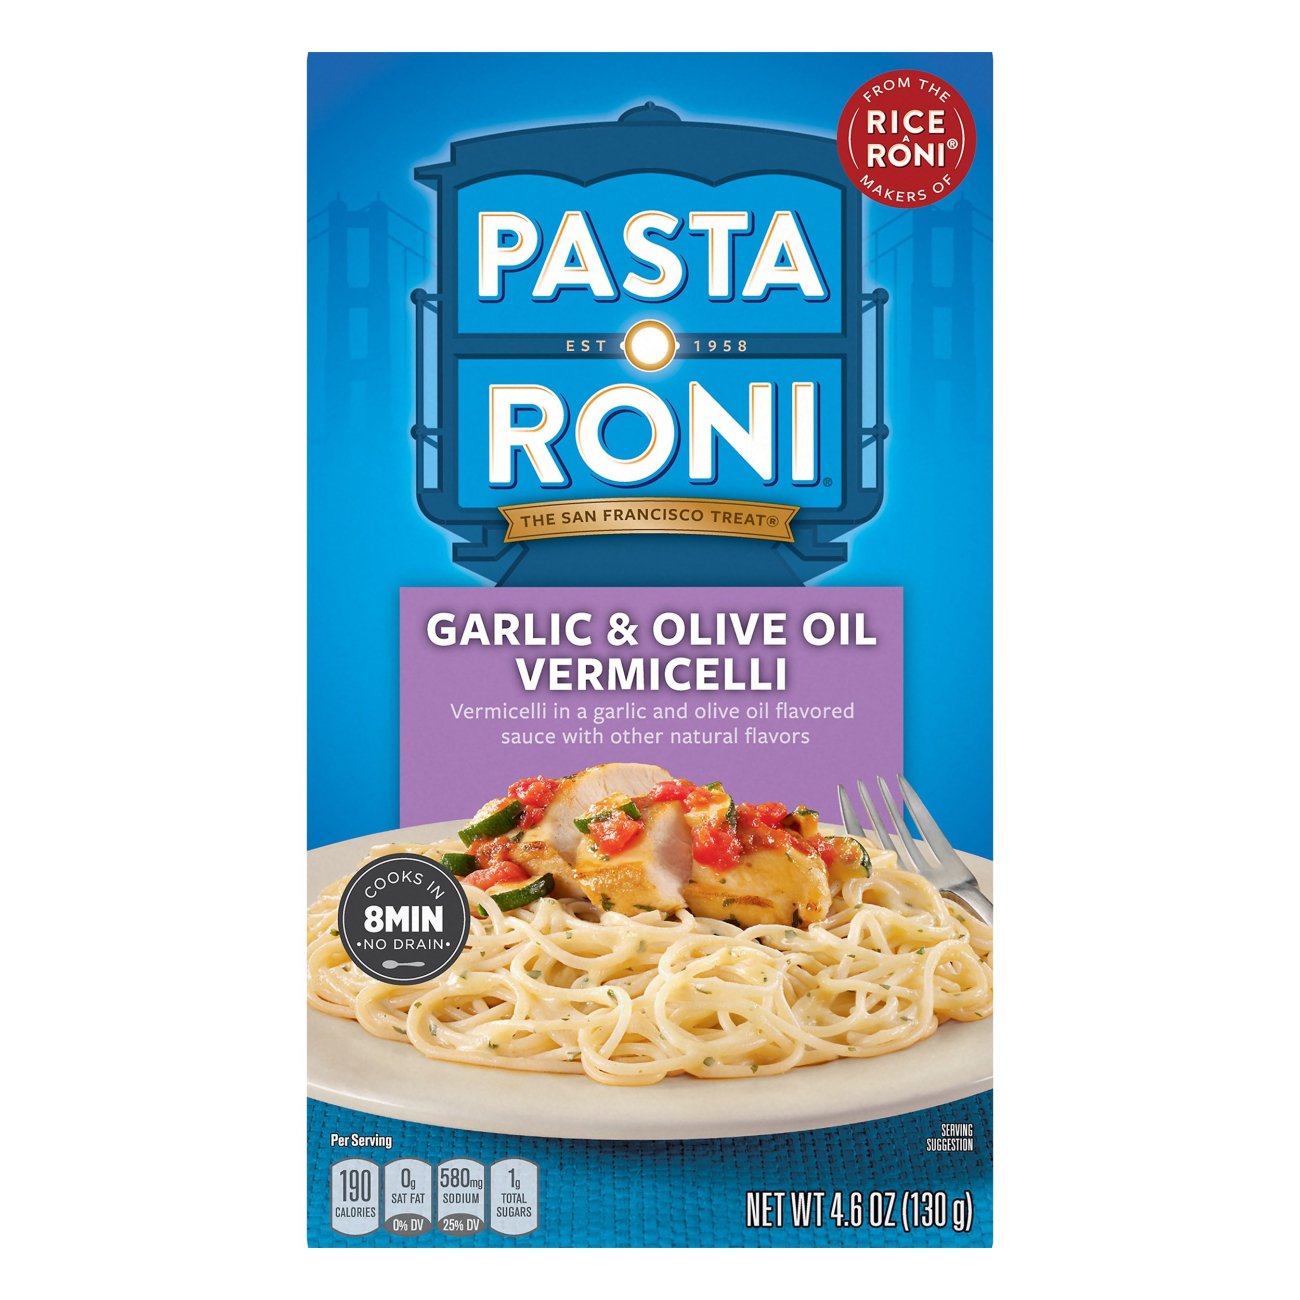 Pasta Roni Garlic and Olive Oil Vermicelli - Shop Pantry Meals at H-E-B